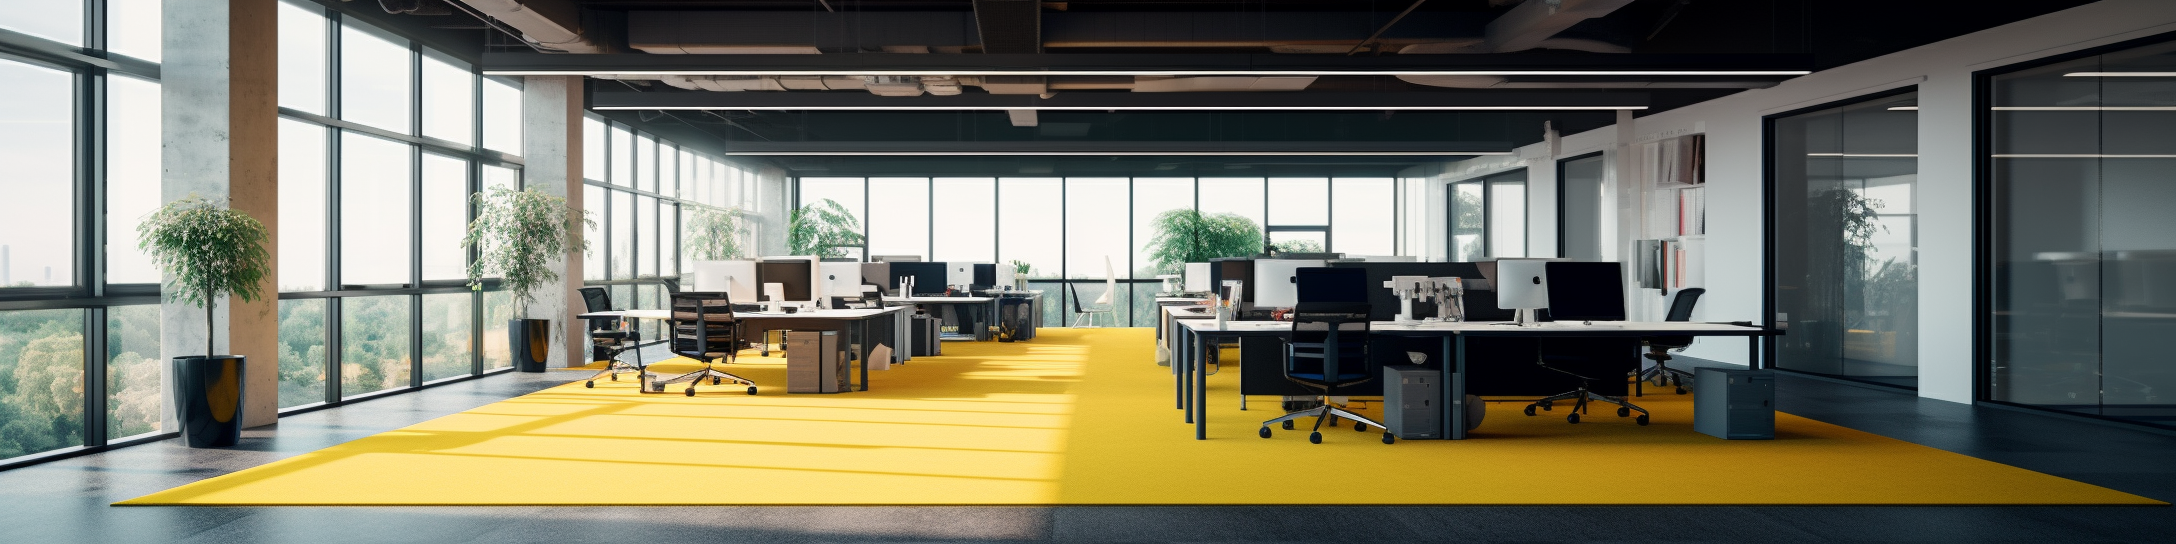 Clean Carpets in Office Spaces